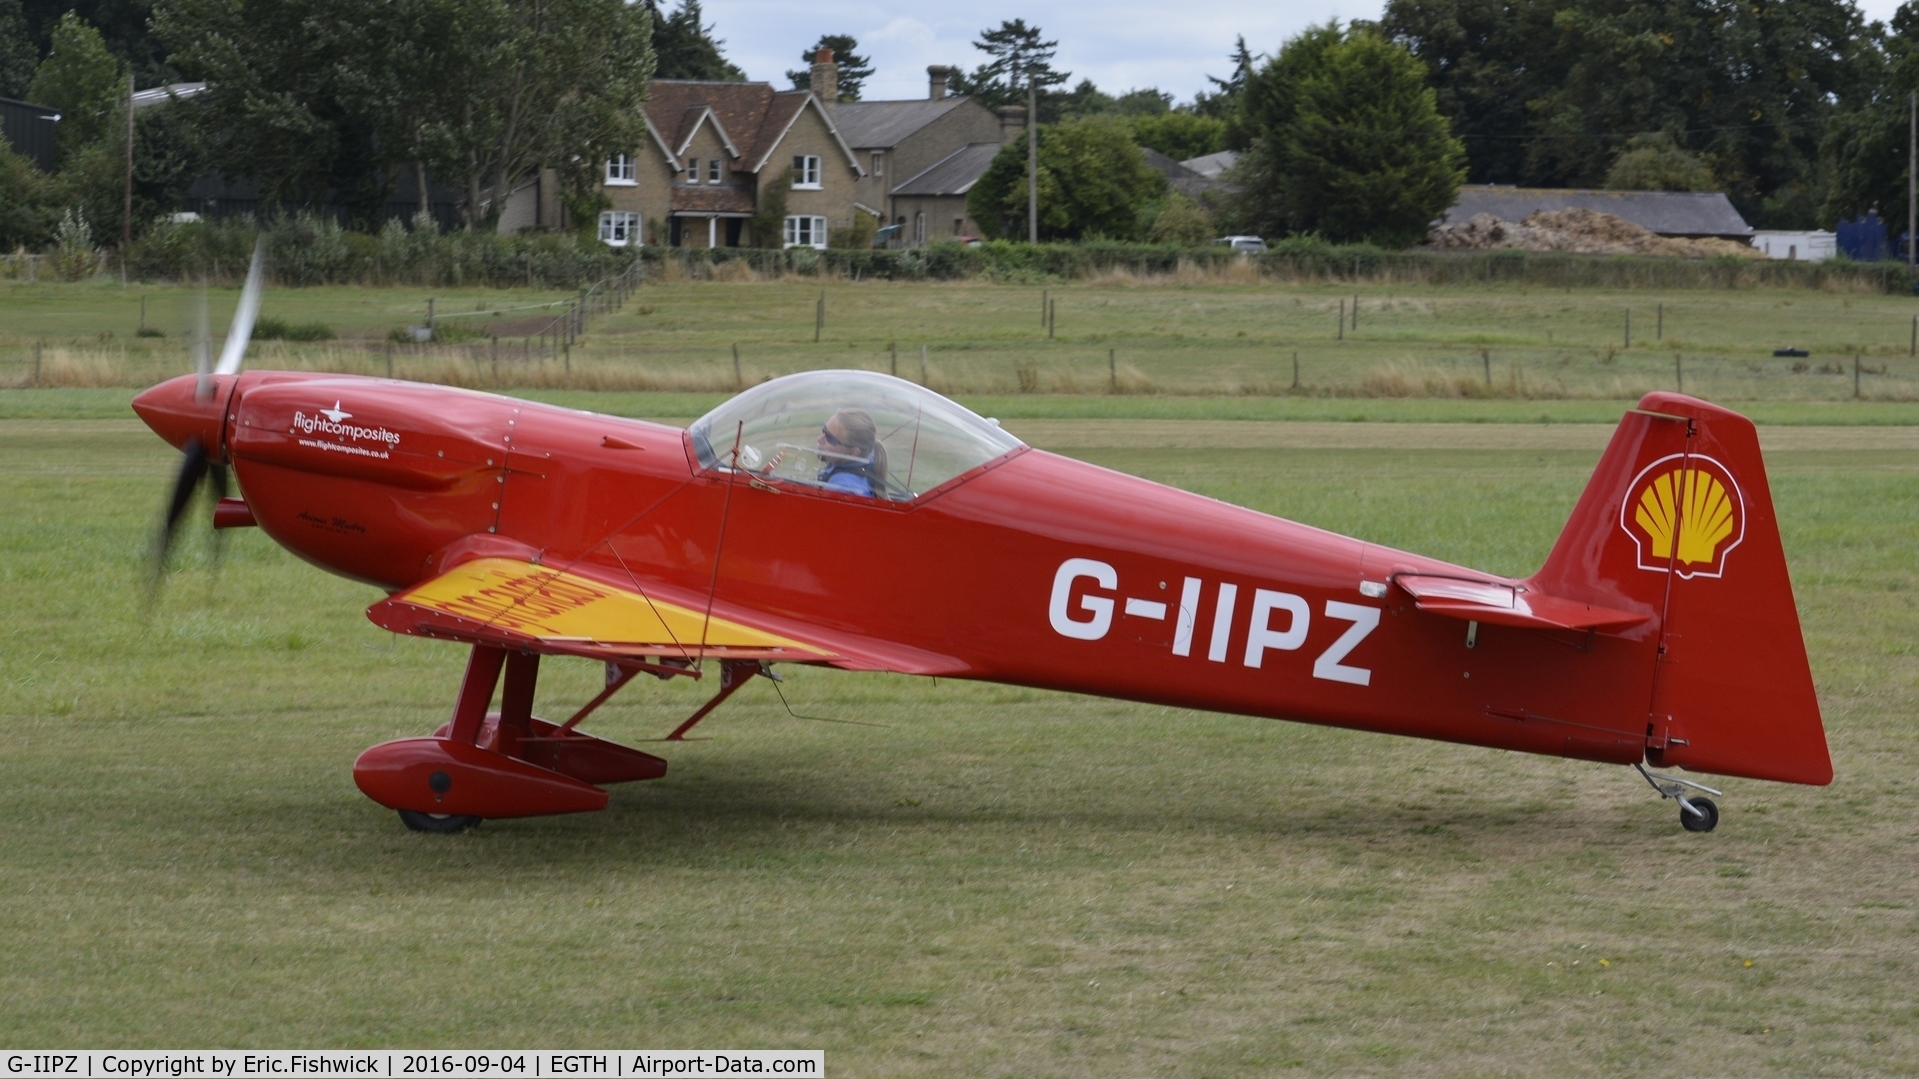 G-IIPZ, 1996 Mudry CAP-232 C/N 12, 1. G-IIPZ visiting The Shuttleworth Collection.